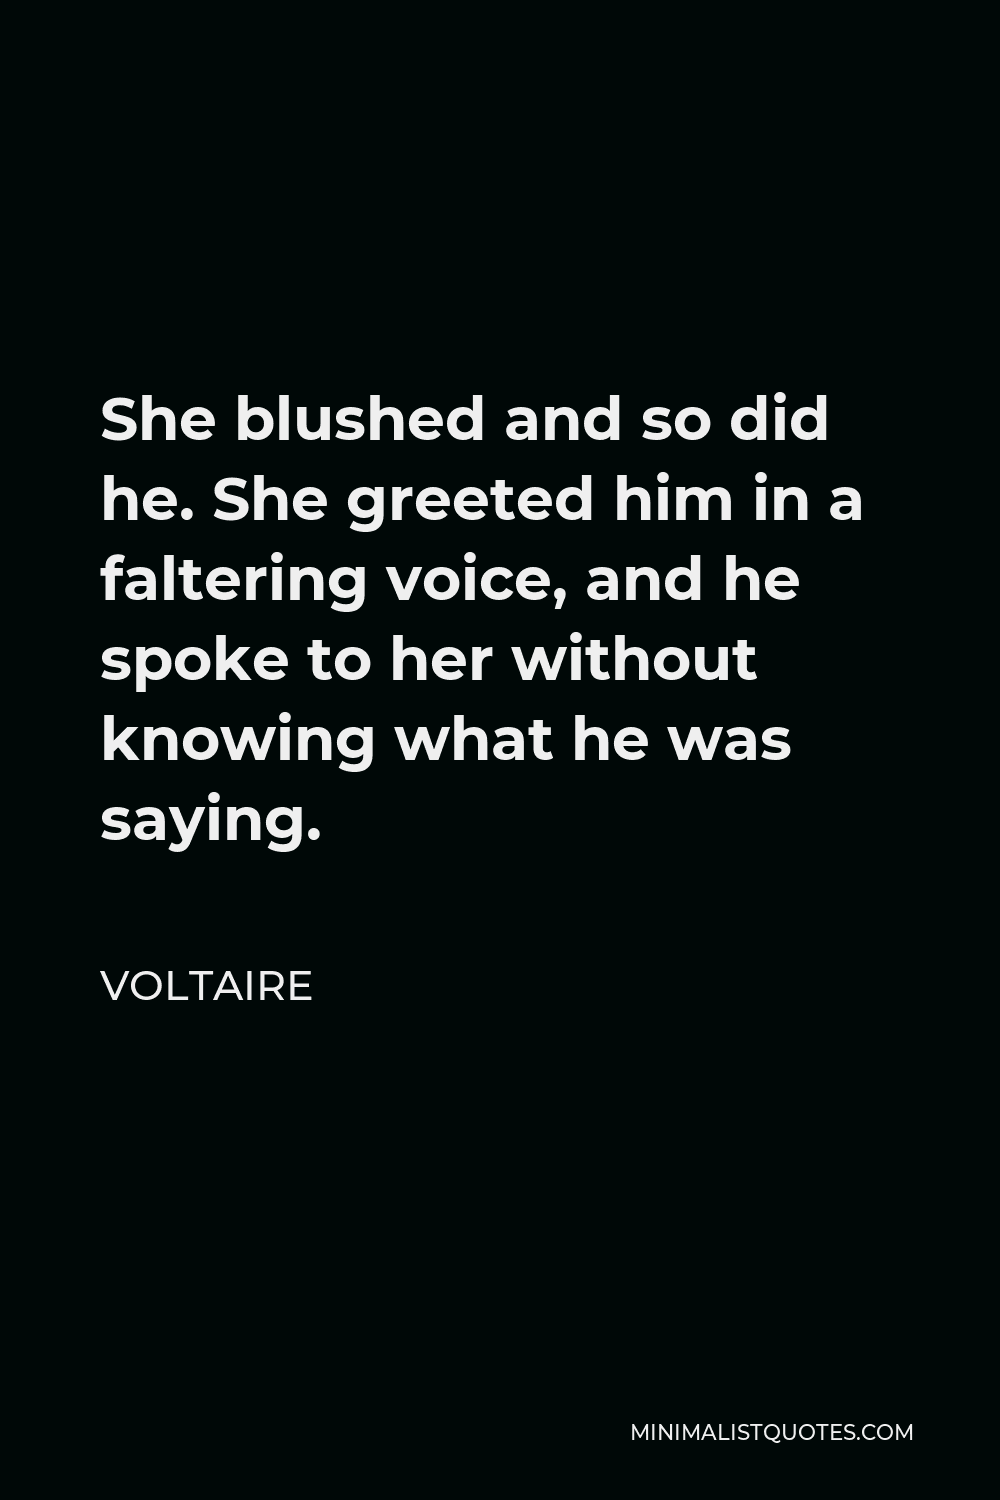 Voltaire Quote - She blushed and so did he. She greeted him in a faltering voice, and he spoke to her without knowing what he was saying.